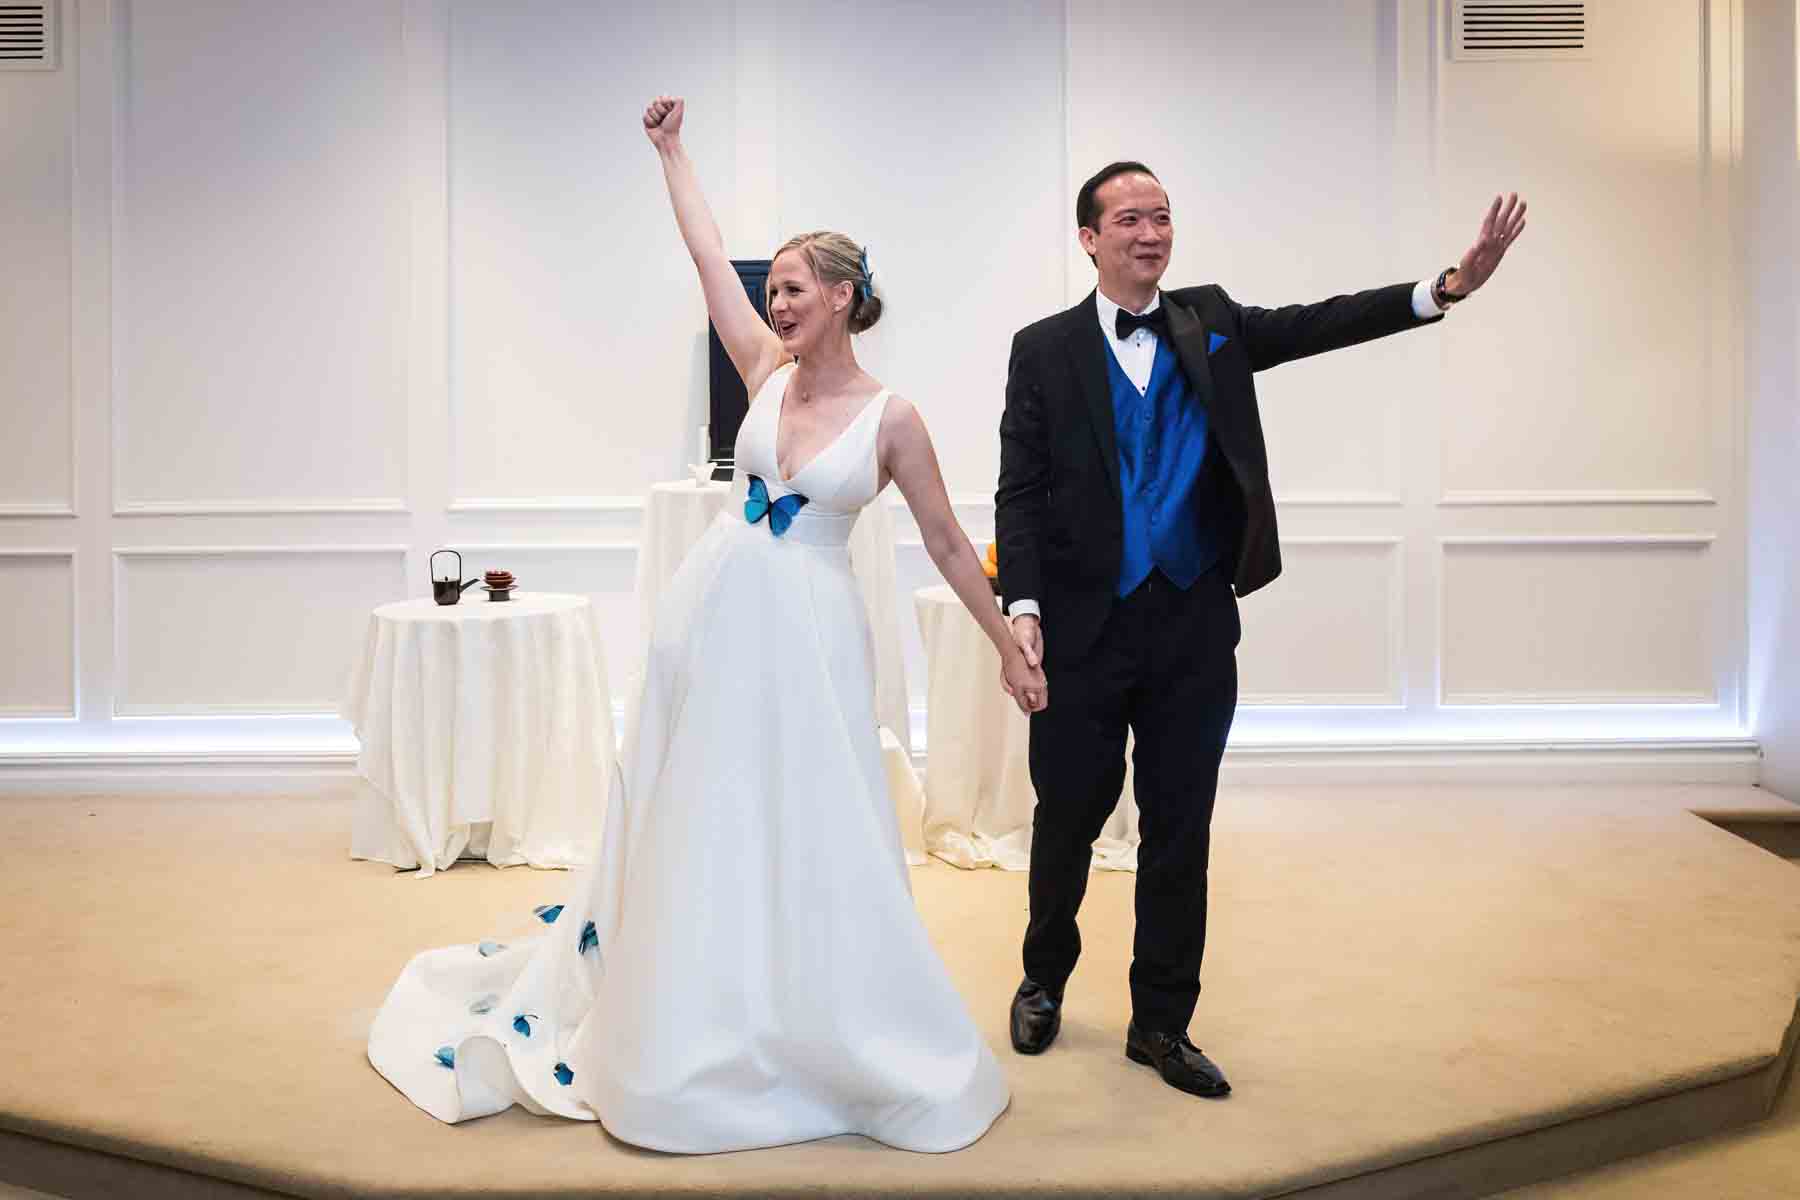 Bride and groom with arms raised excited after ceremony at a Terrace on the Park wedding